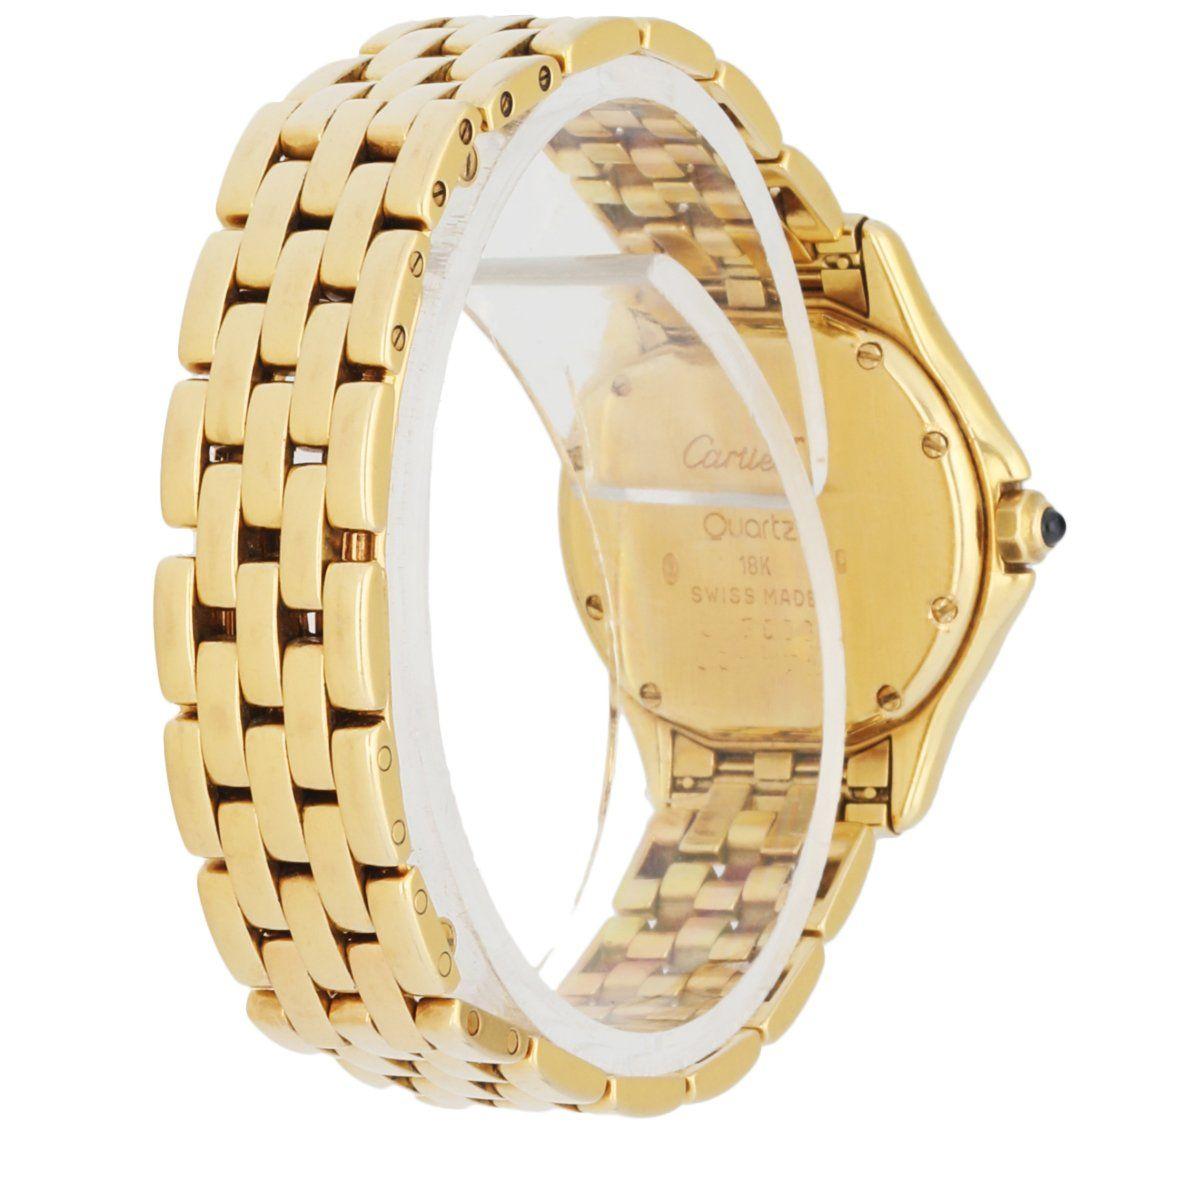 Cartier Panthere Cougar 887906 18k Yellow Gold Ladies Watch 1